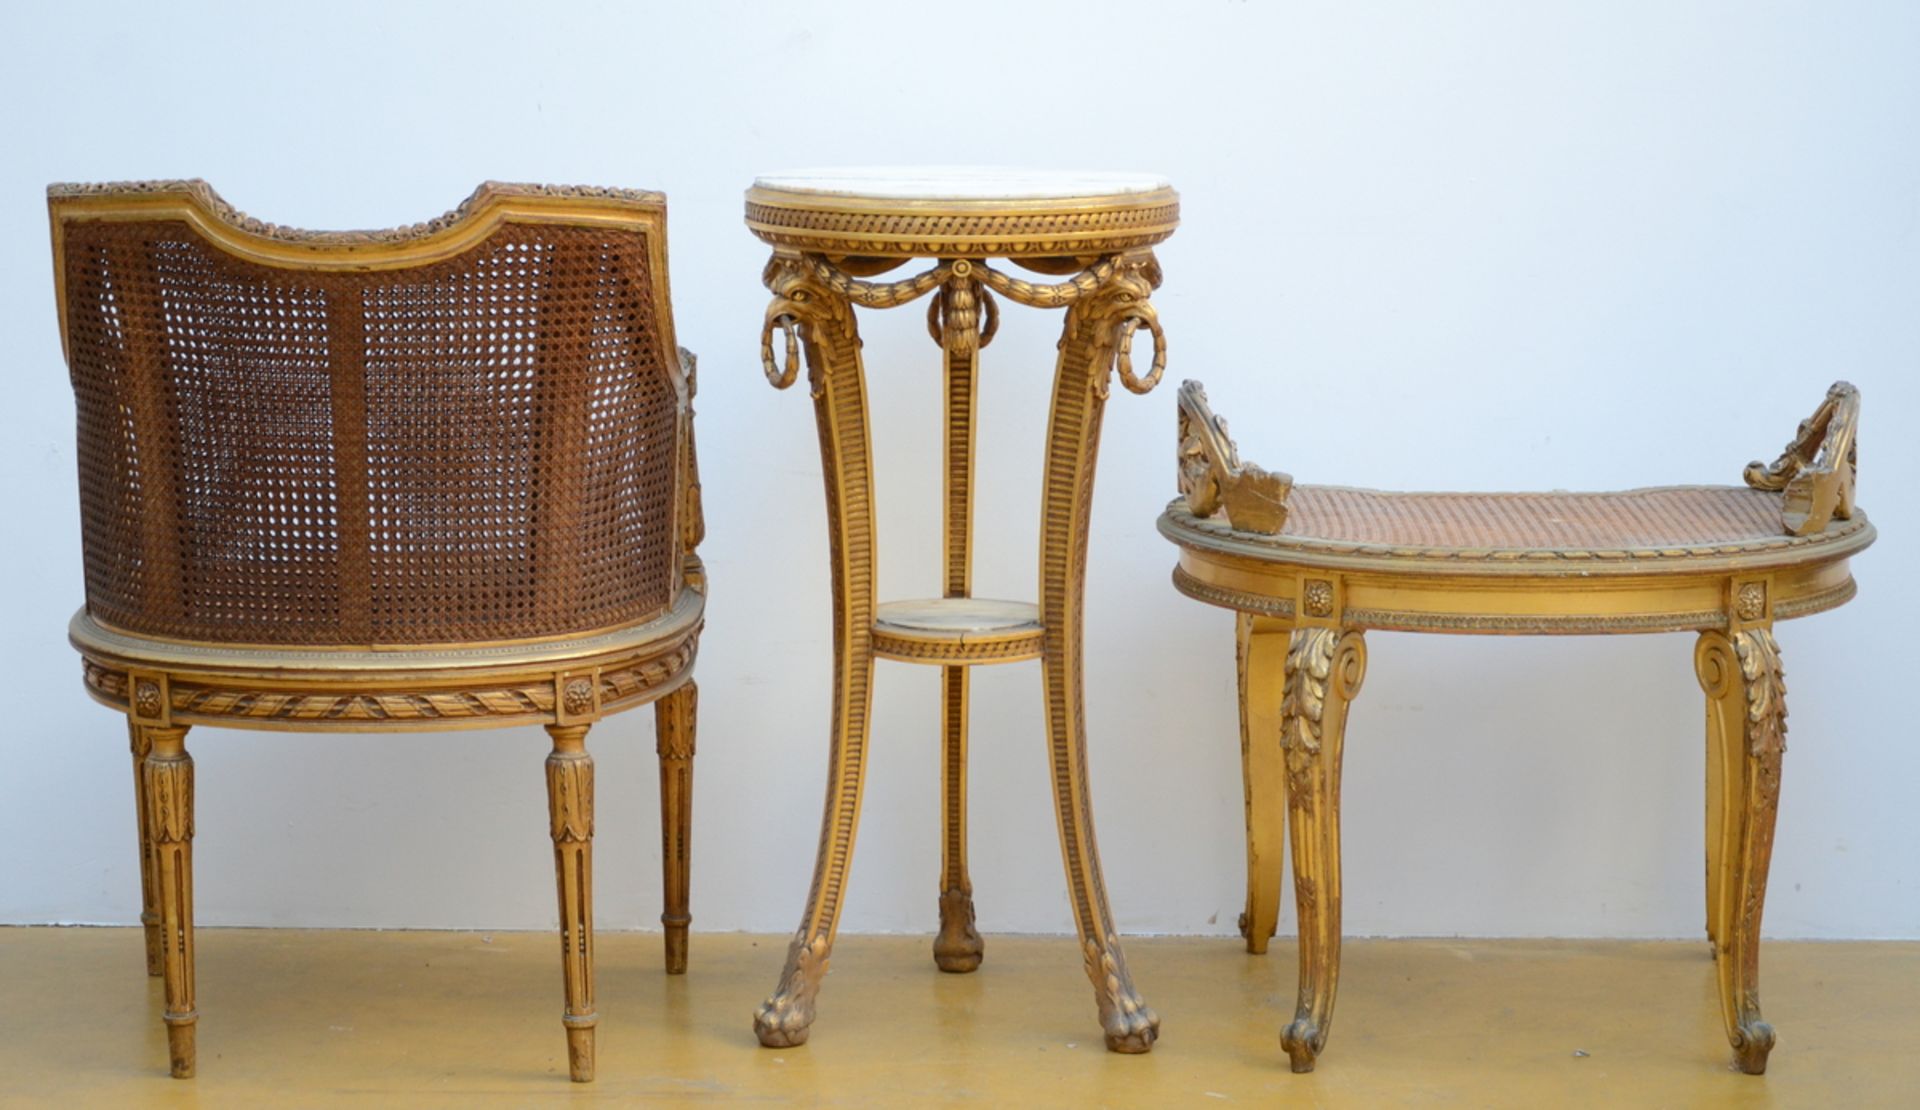 Lot: two gilt seats and a small table (h 60 - 81 cm) - Image 2 of 2